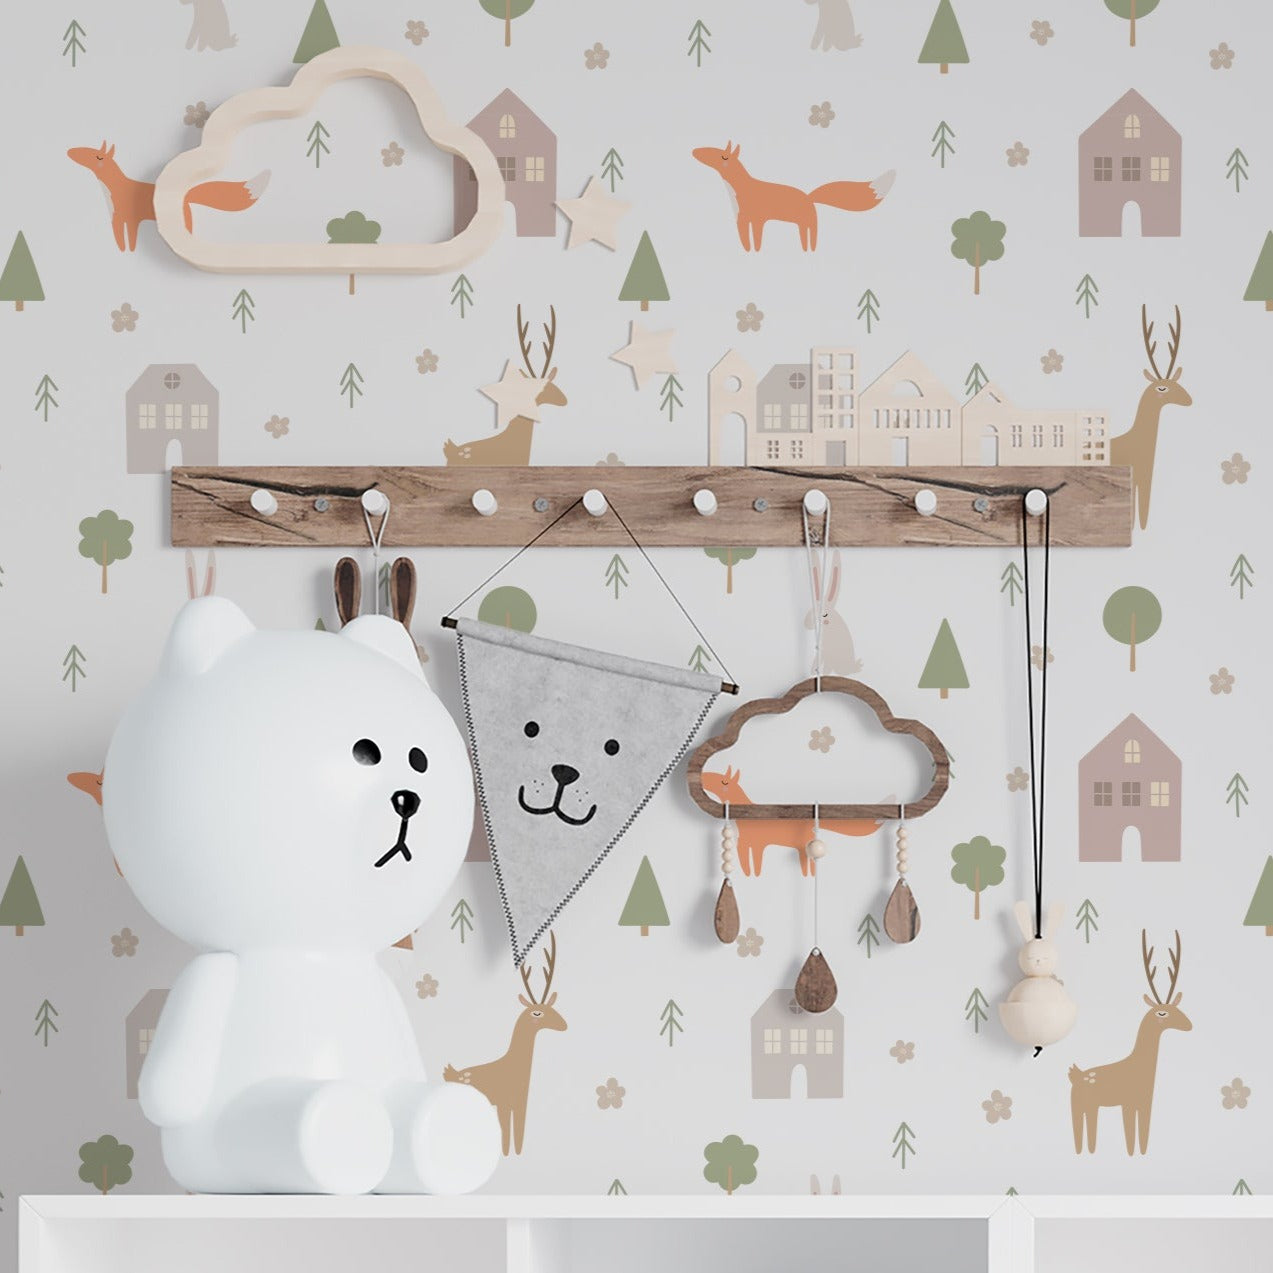 Children's room decorated with Stag and Fox Wallpaper enhancing the playful and whimsical atmosphere. The wallpaper includes motifs of stags, foxes, and forest elements, complementing the room's natural wood furniture and playful toys.